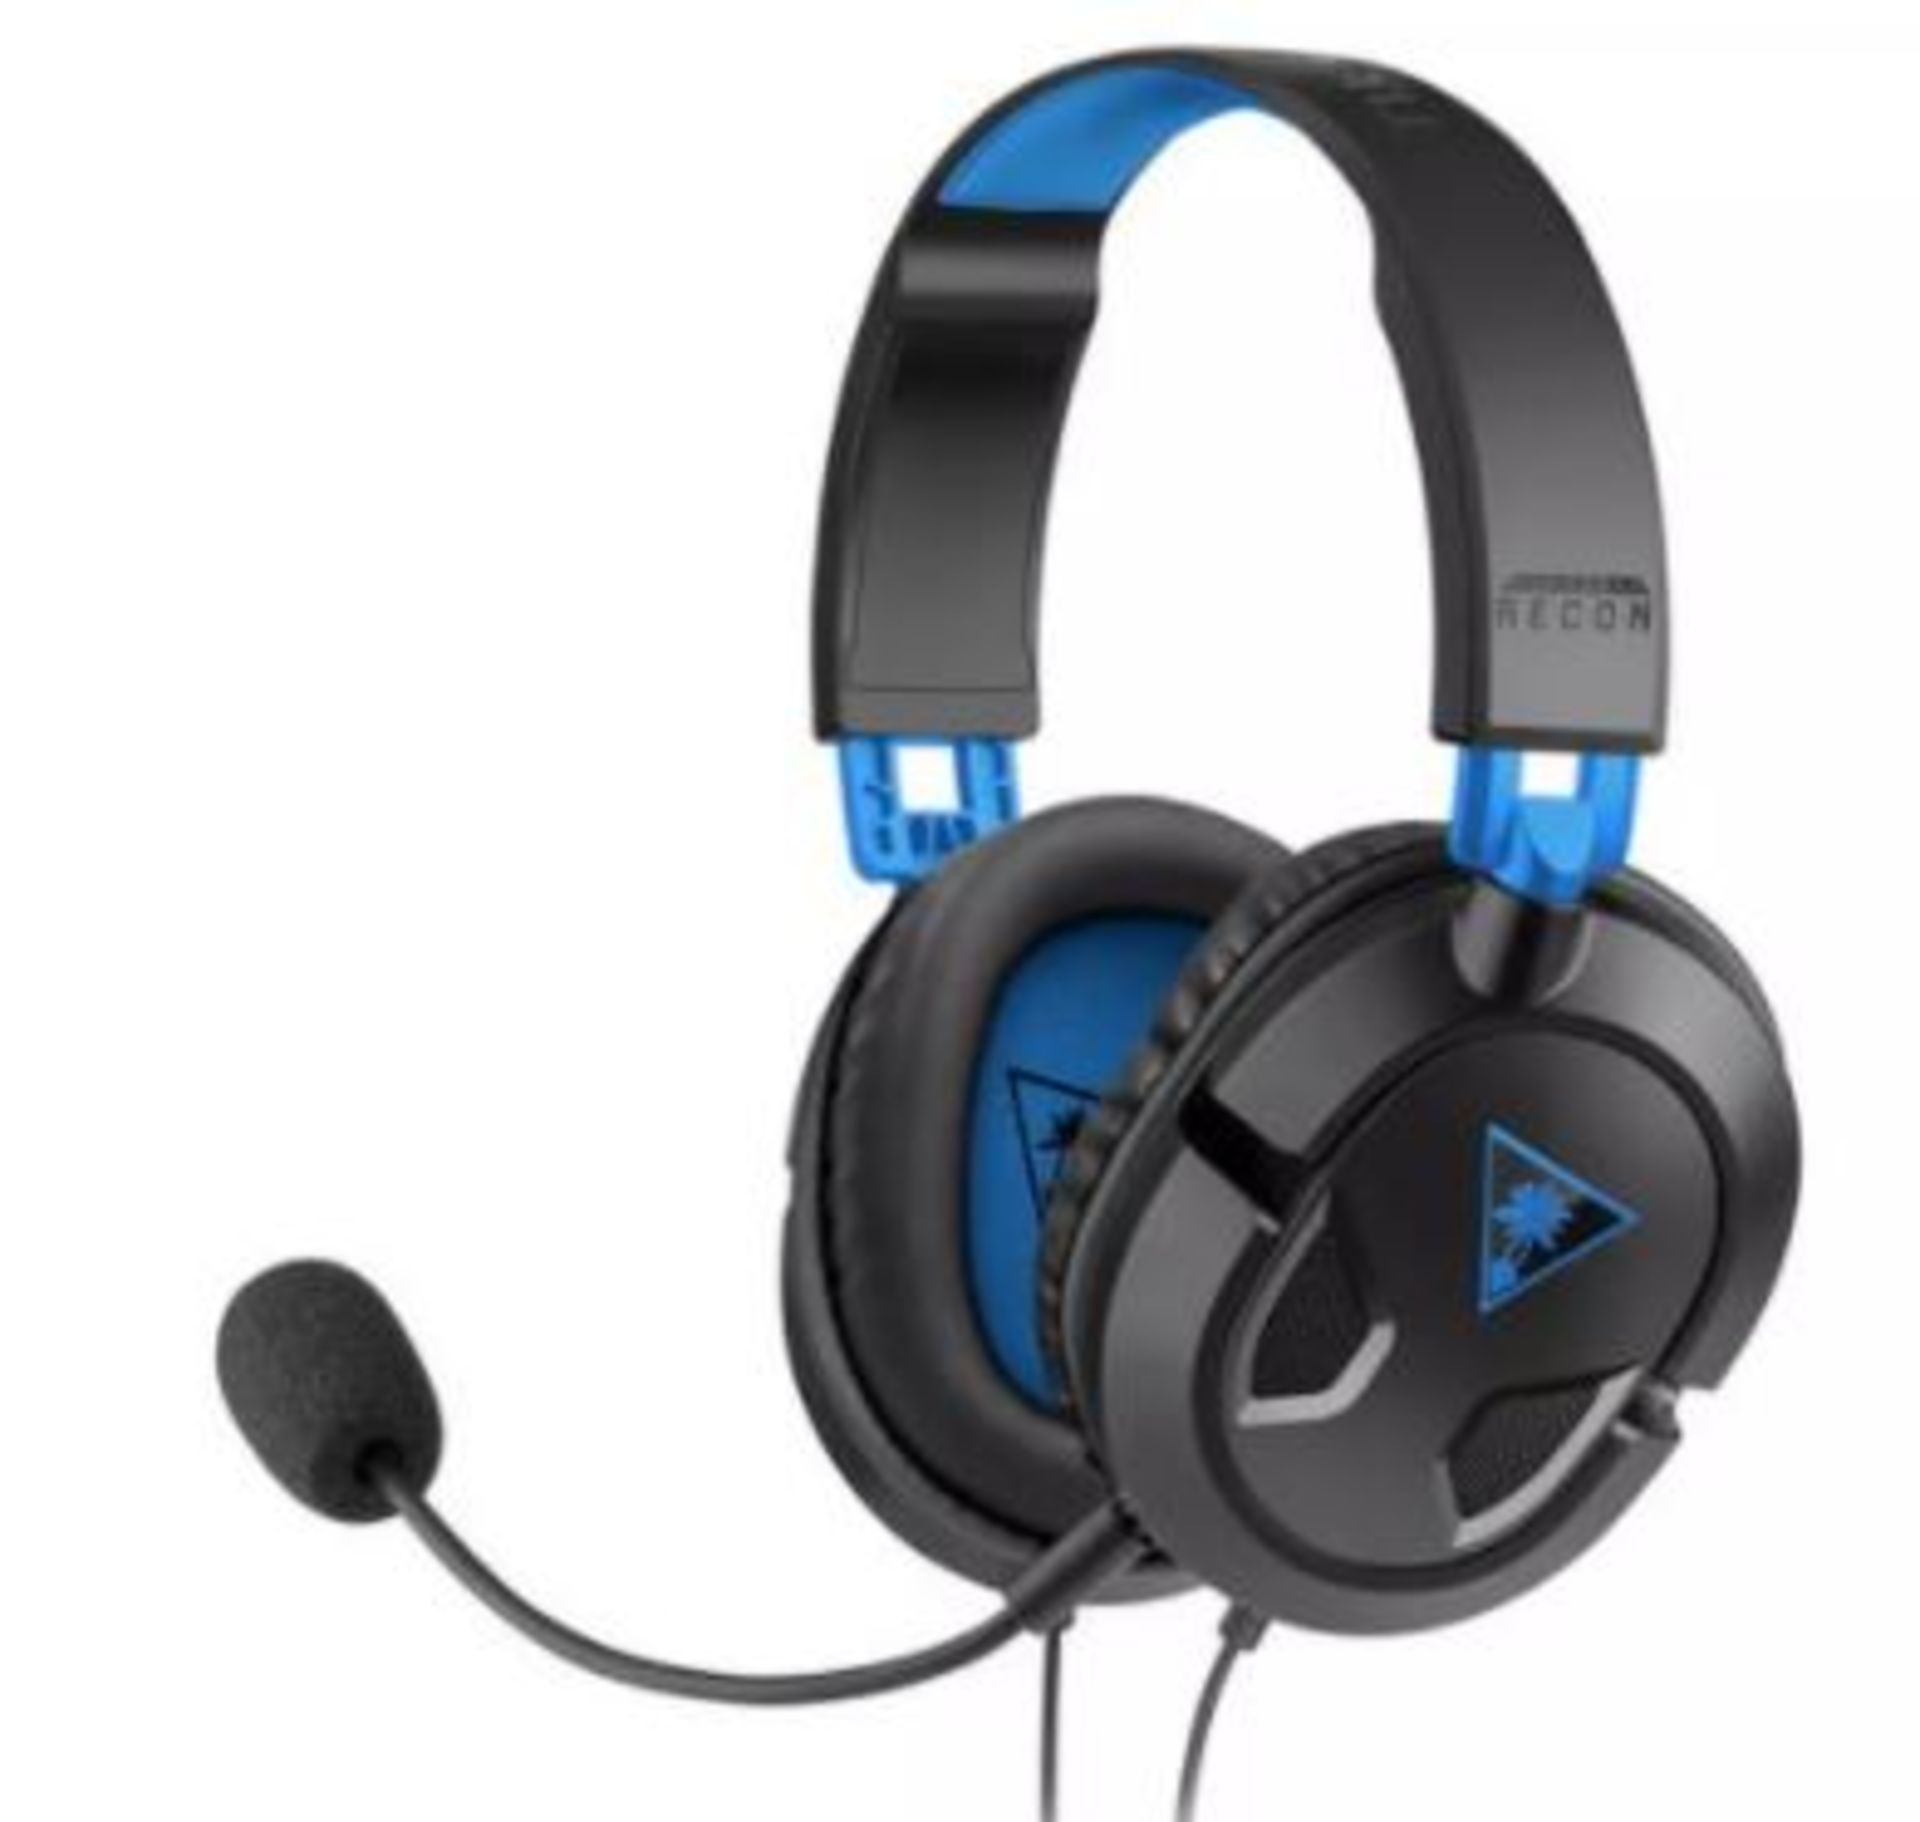 6x Mixed Turtle Beach Wired Gaming Headsets. 4x Recon 70 PS4 PS5. 1x Recon 70 Xbox. 1x Recon 50P PS - Image 2 of 4